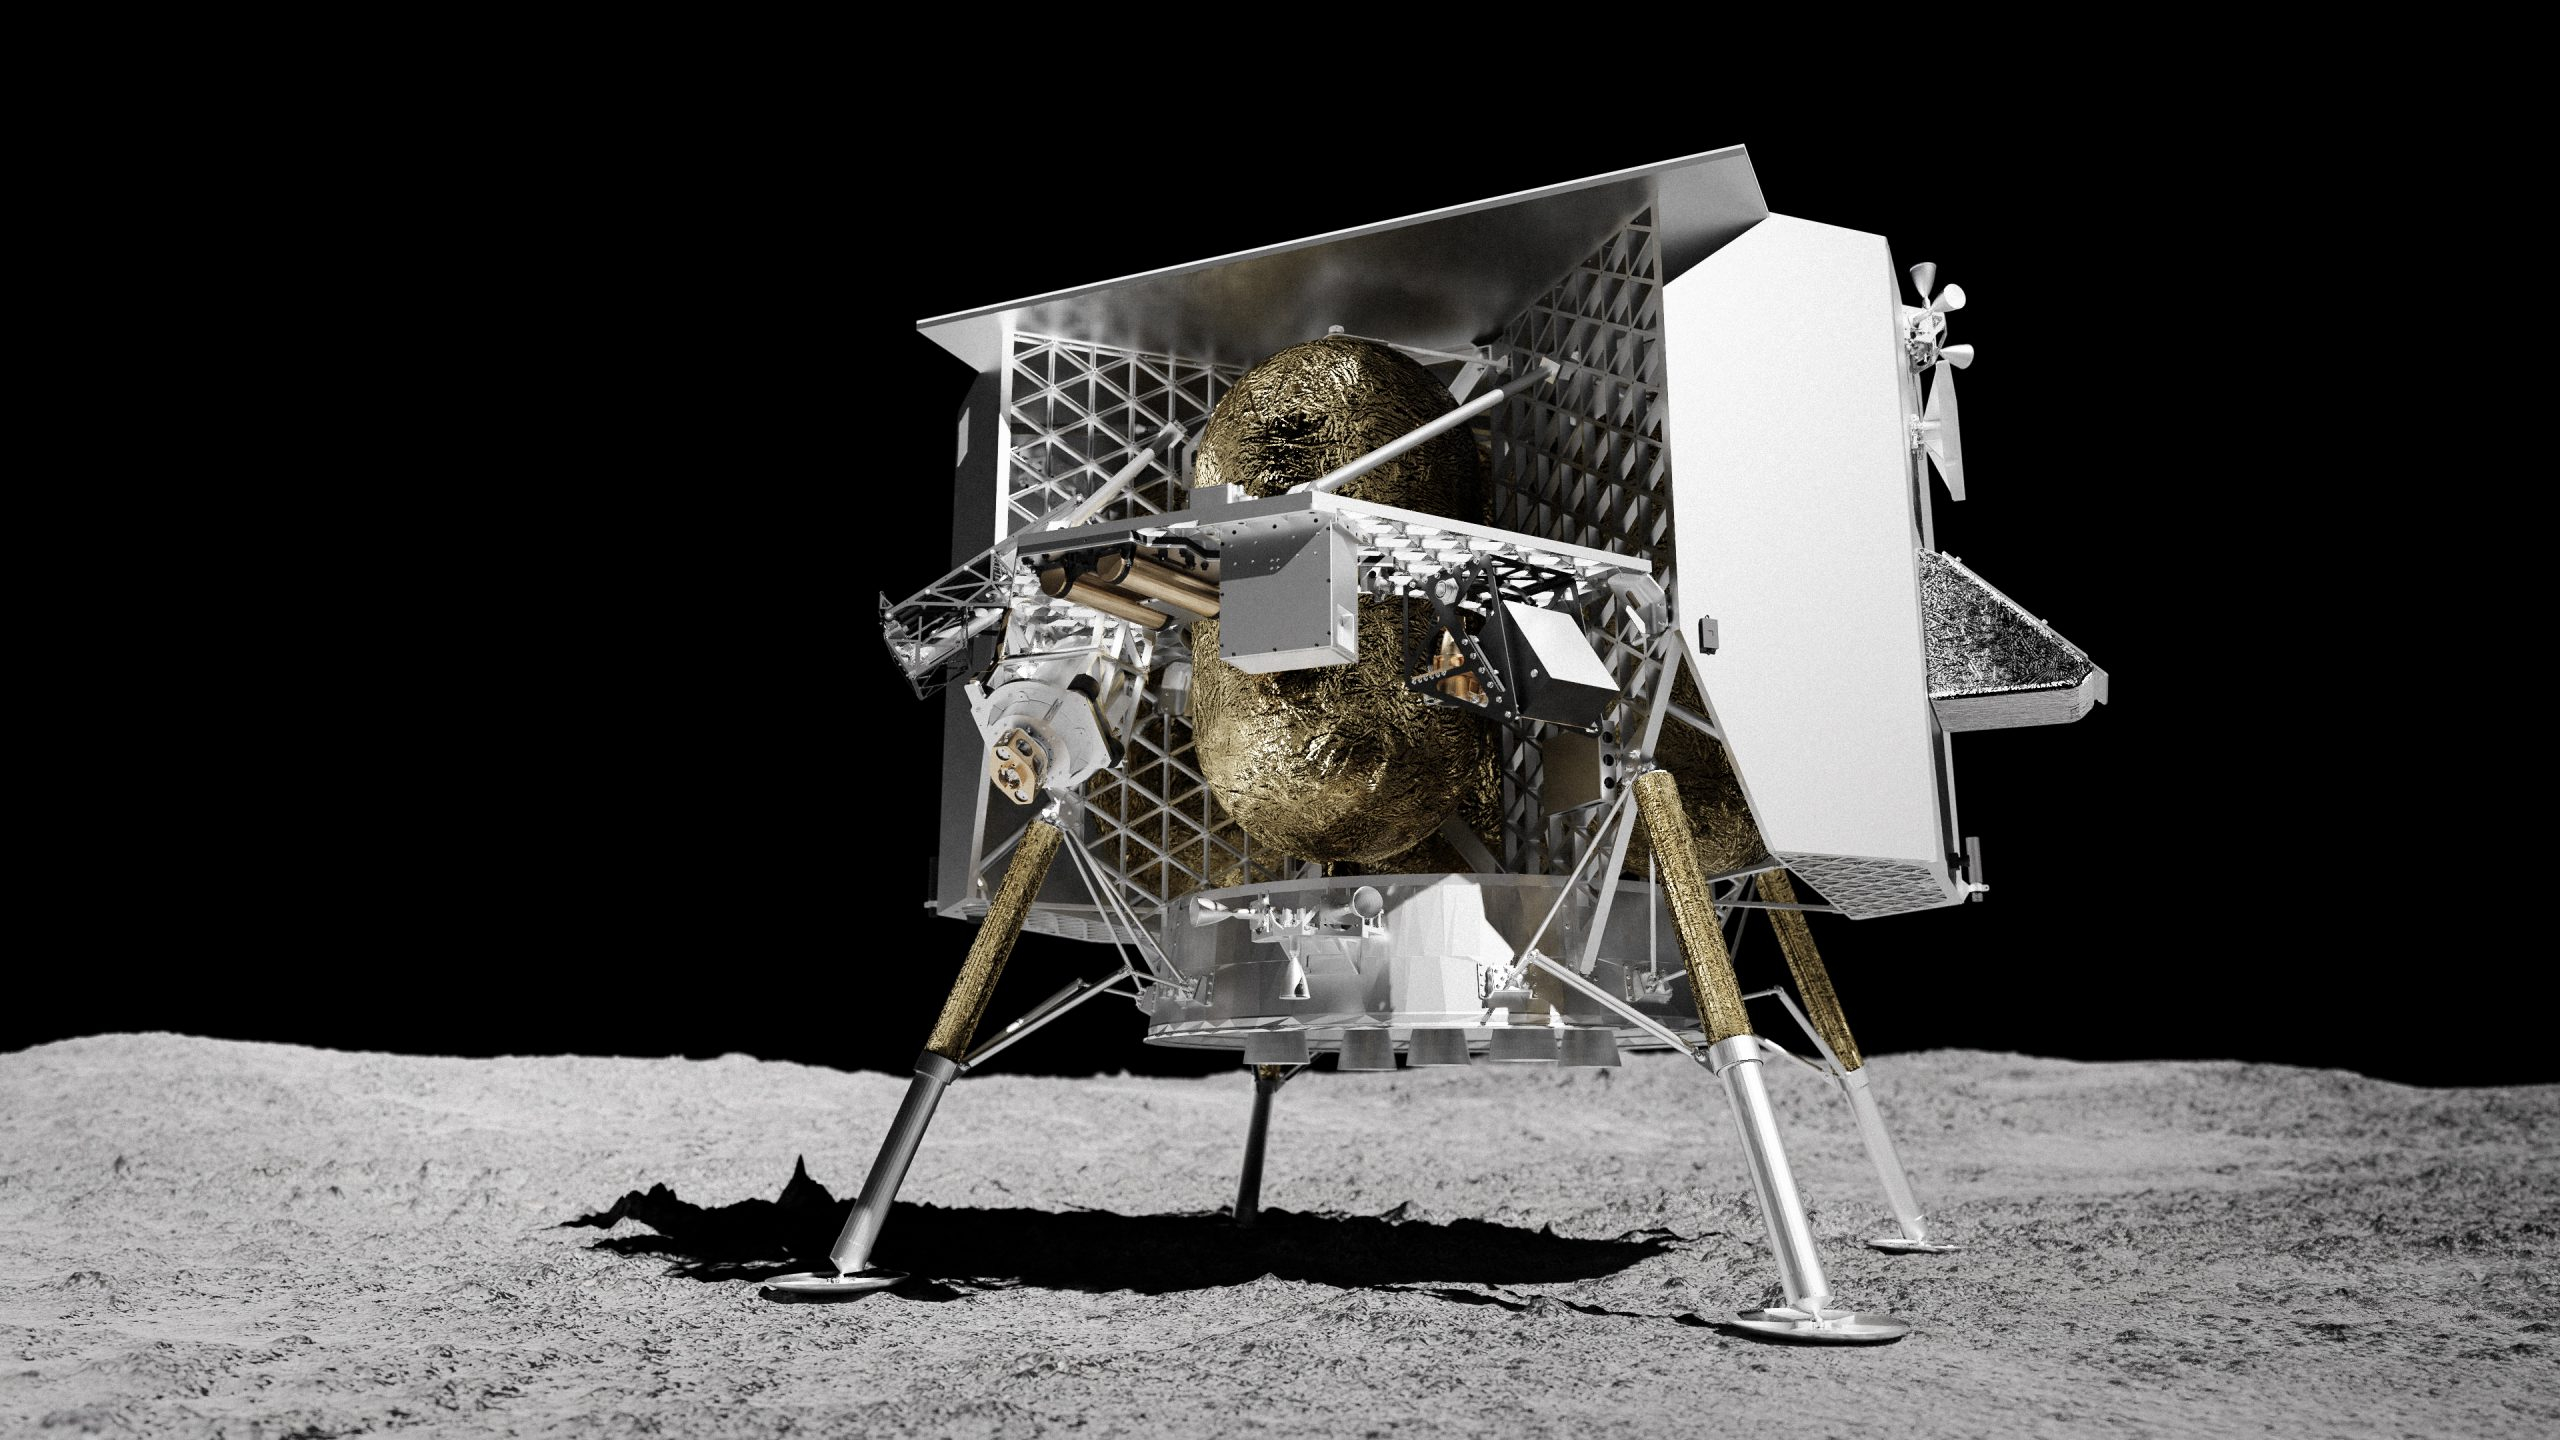 a four-legged lander probe with an open-face metal body, housing two stacked, gold-foiled, spherical fuel tanks. The probe stands on the grey dusty surface of the moon, lit from above, with a background of black space.